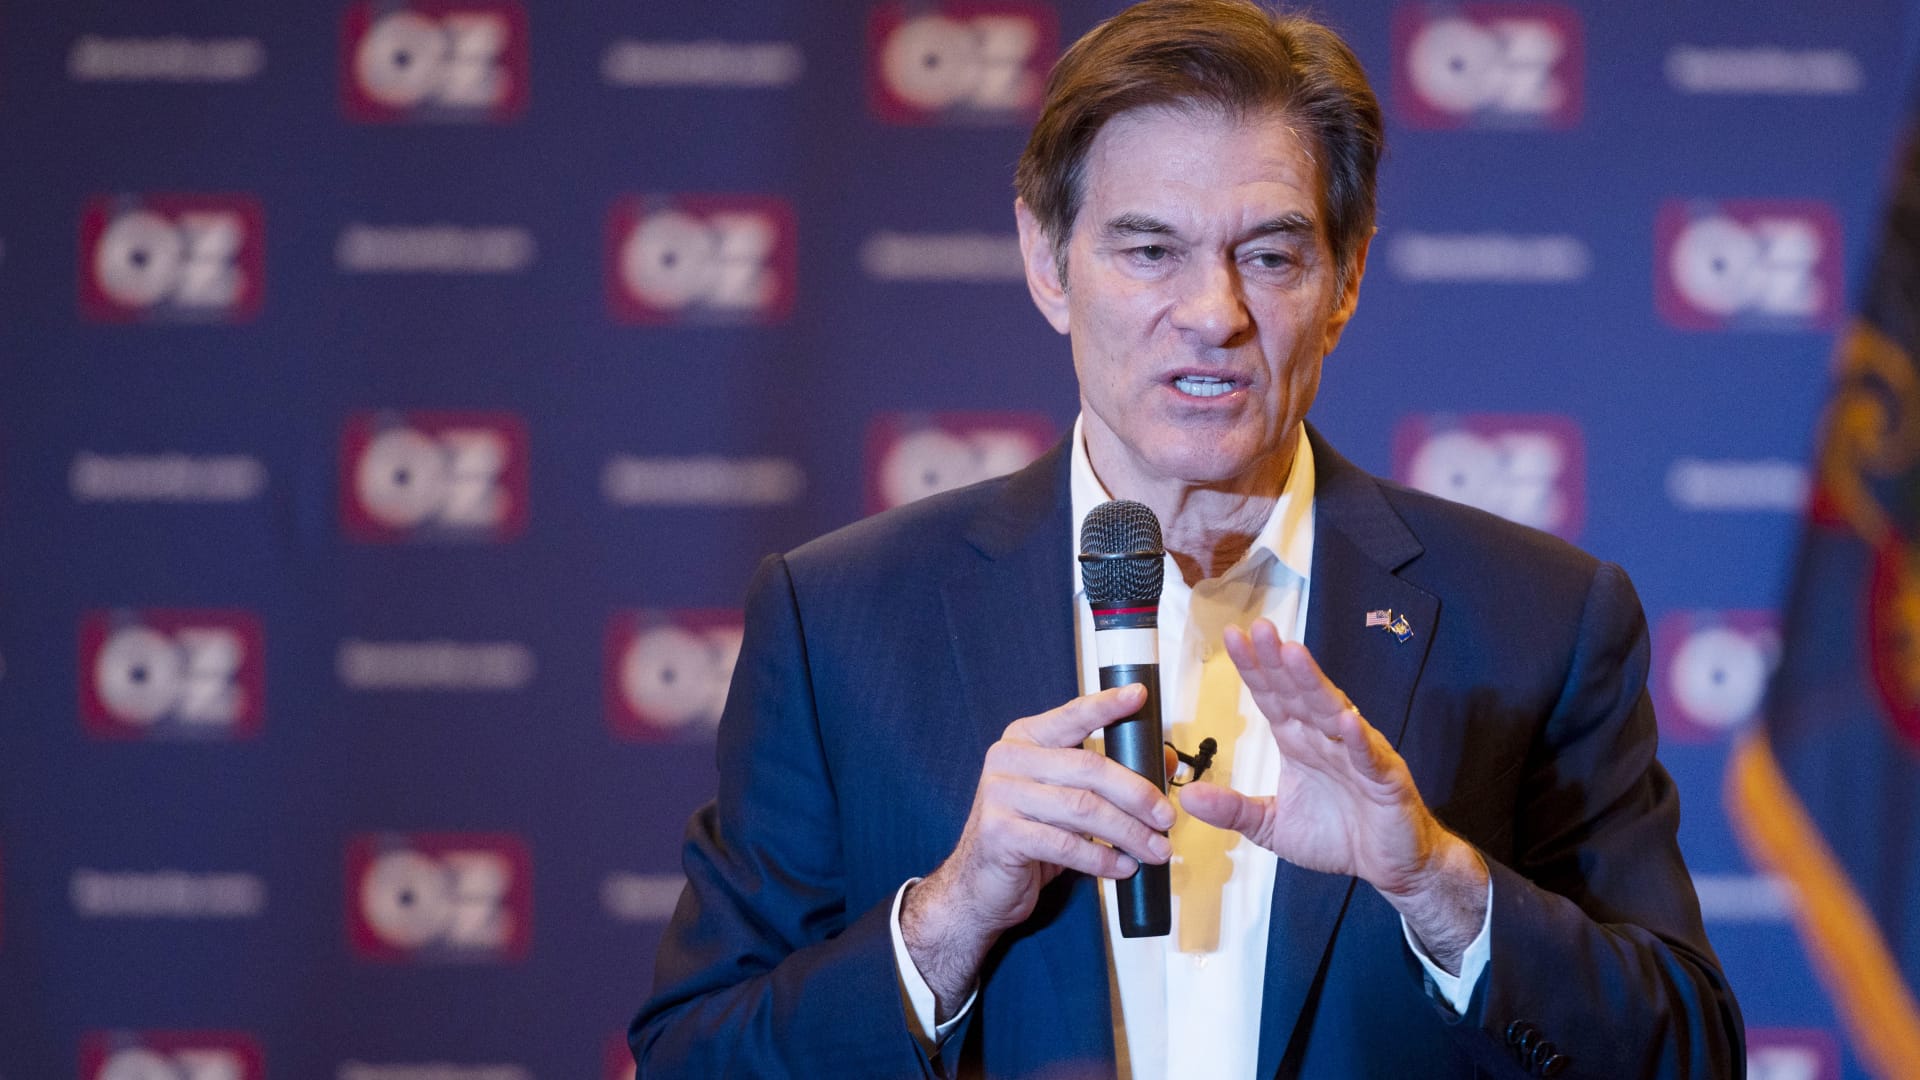 Dr. Oz has close ties to the wealthy du Pont family heirs, and they’re backing his GOP bid for Pennsylvania’s Senate seat